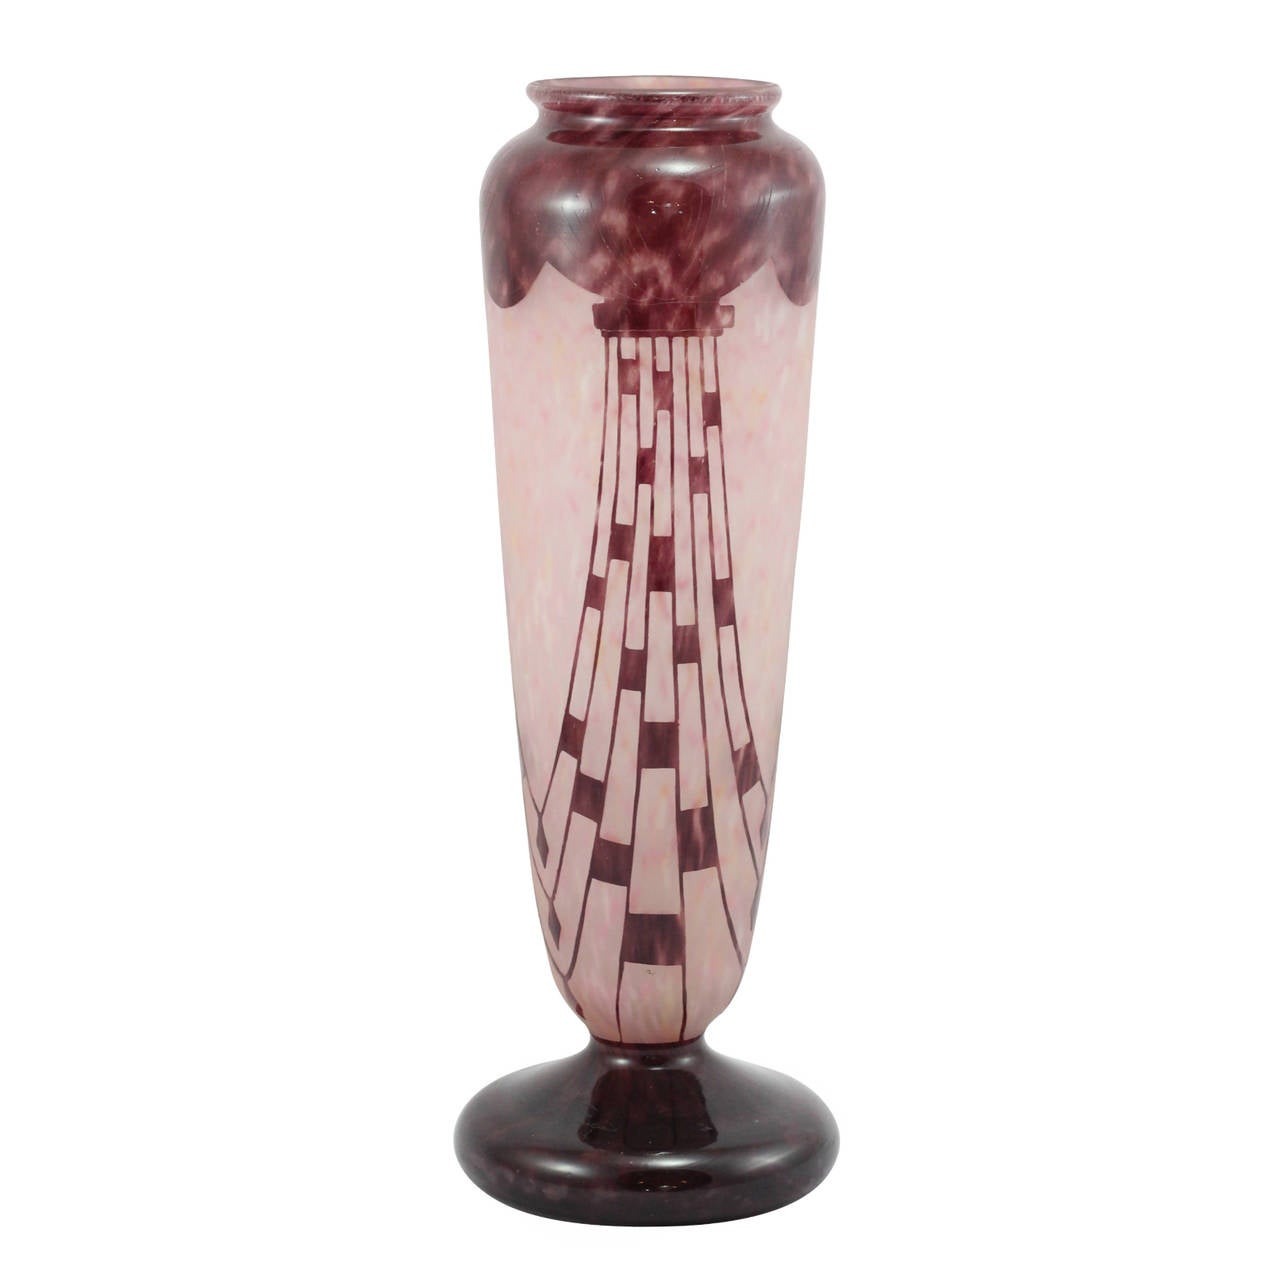 Art Deco cameo glass 'Colliers' vase by Charles Schneider Company. Inscribed to base Le Verre Francaise, this design is known to have be released in 1927-1928. it features an acid etched pattern of amethyst necklaces on a pink and white mottled base.